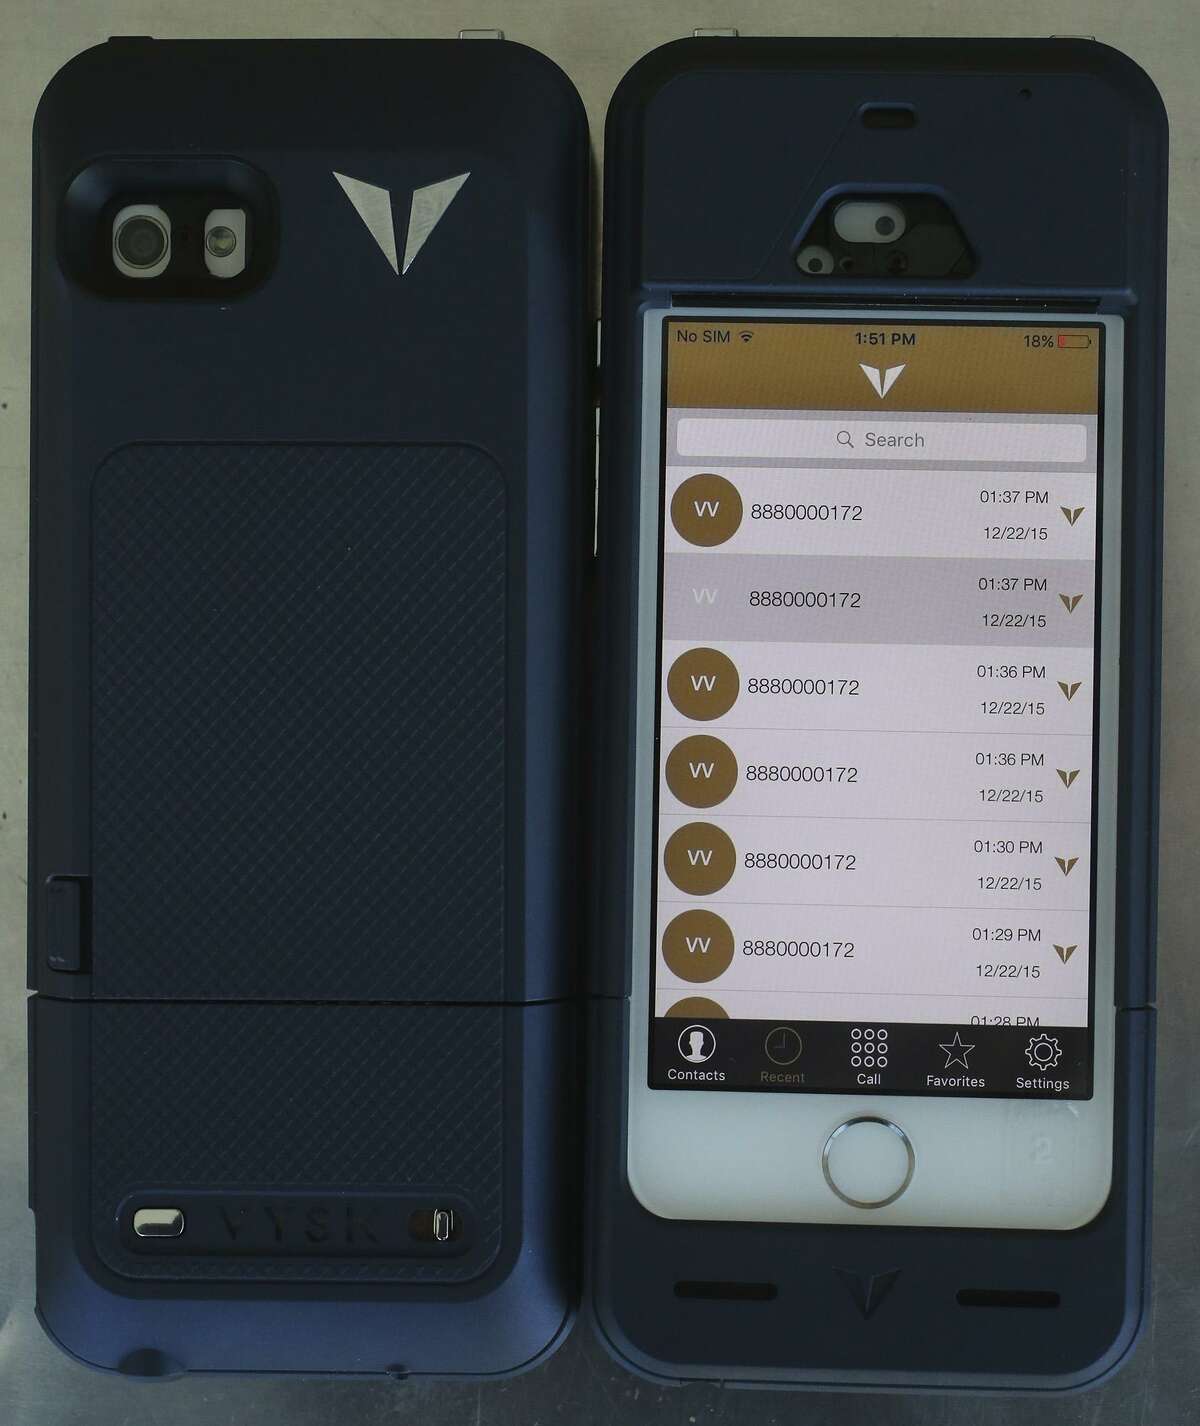 A Vysk Communications said its smartphone case is designed to prevent eavesdropping and hacking.